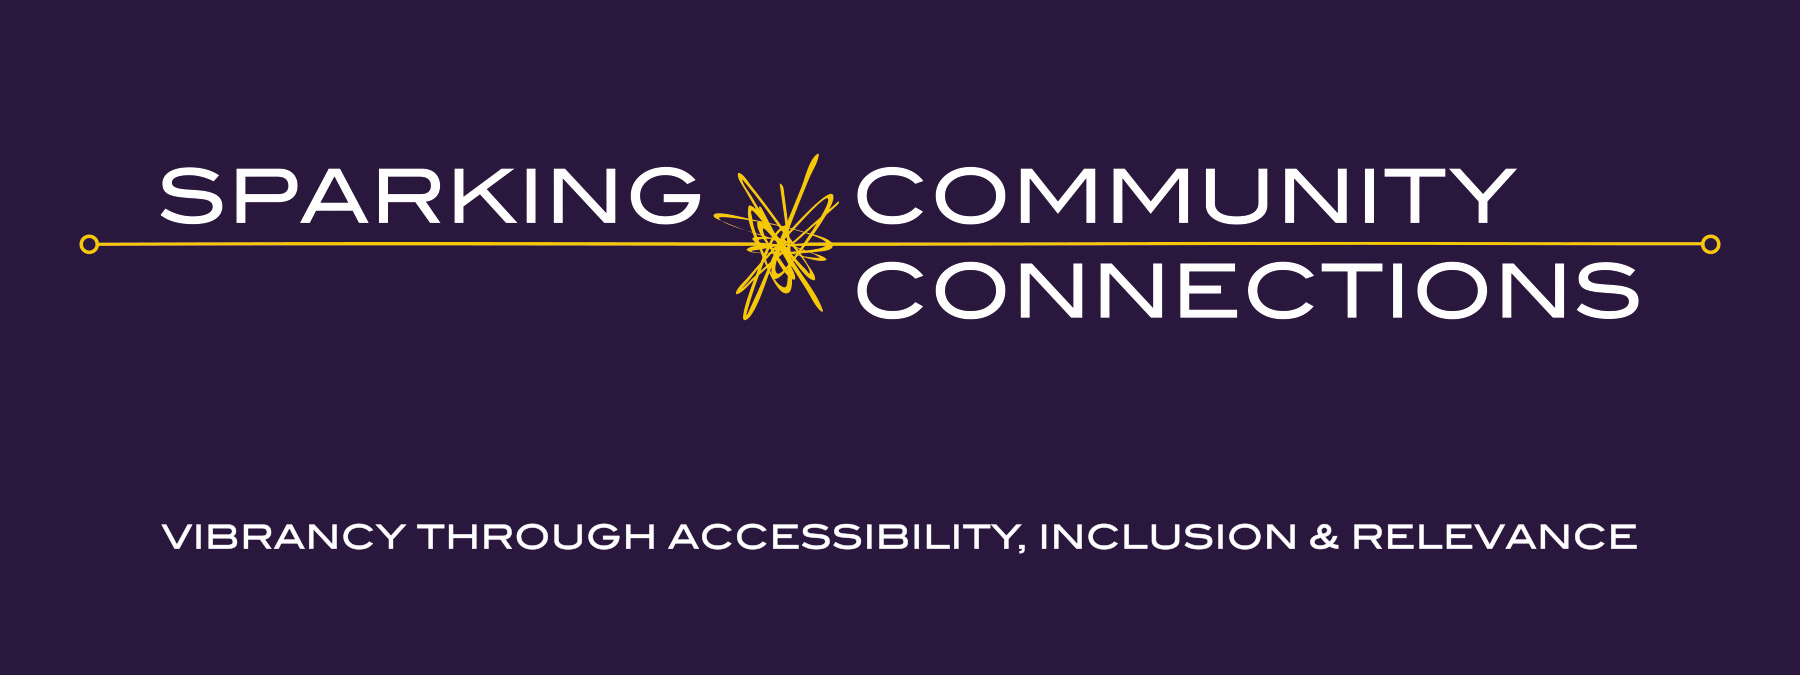 Sparking Community Connections: Vibrancy through Accessibility, Inclusion & Relevance